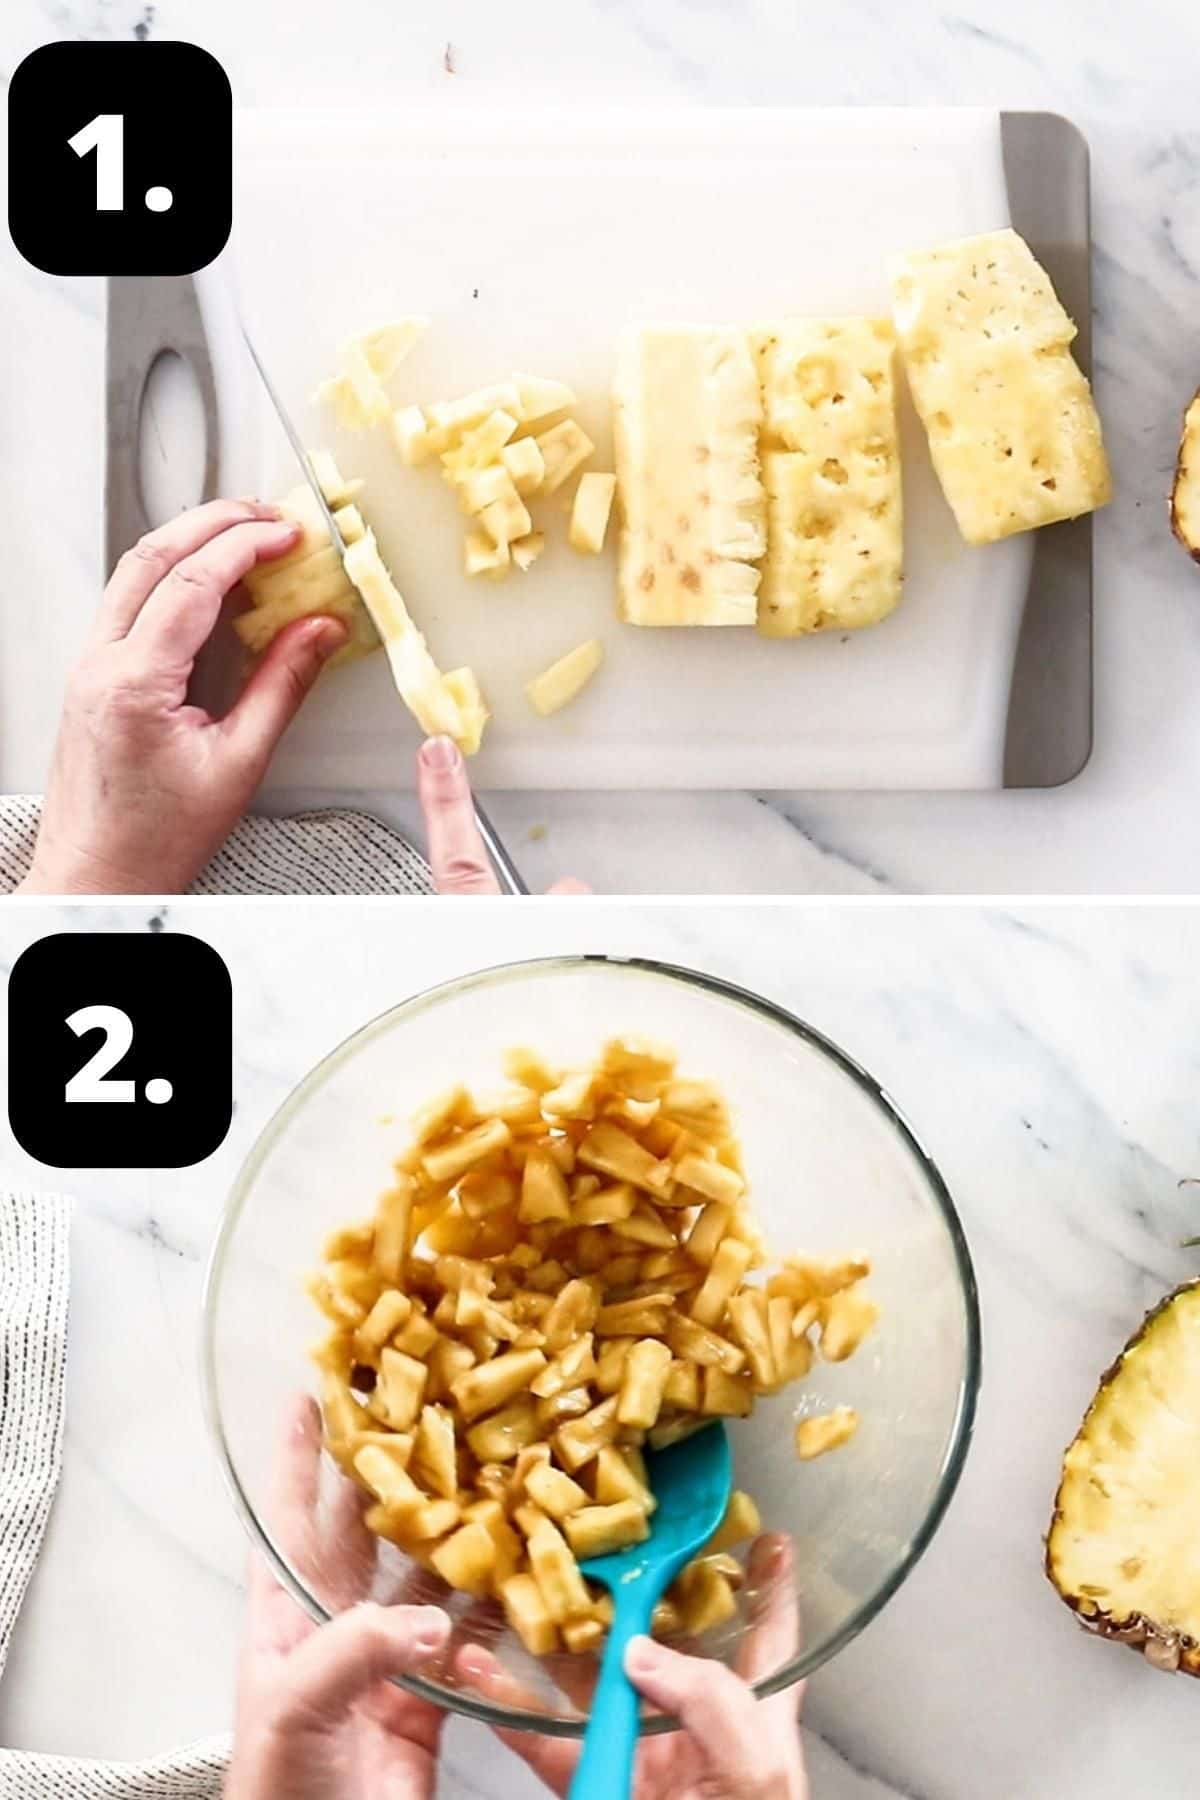 Steps 1-2 of preparing this recipe - chopping the fresh pineapple, and tossing the pineapple pieces in a bowl.